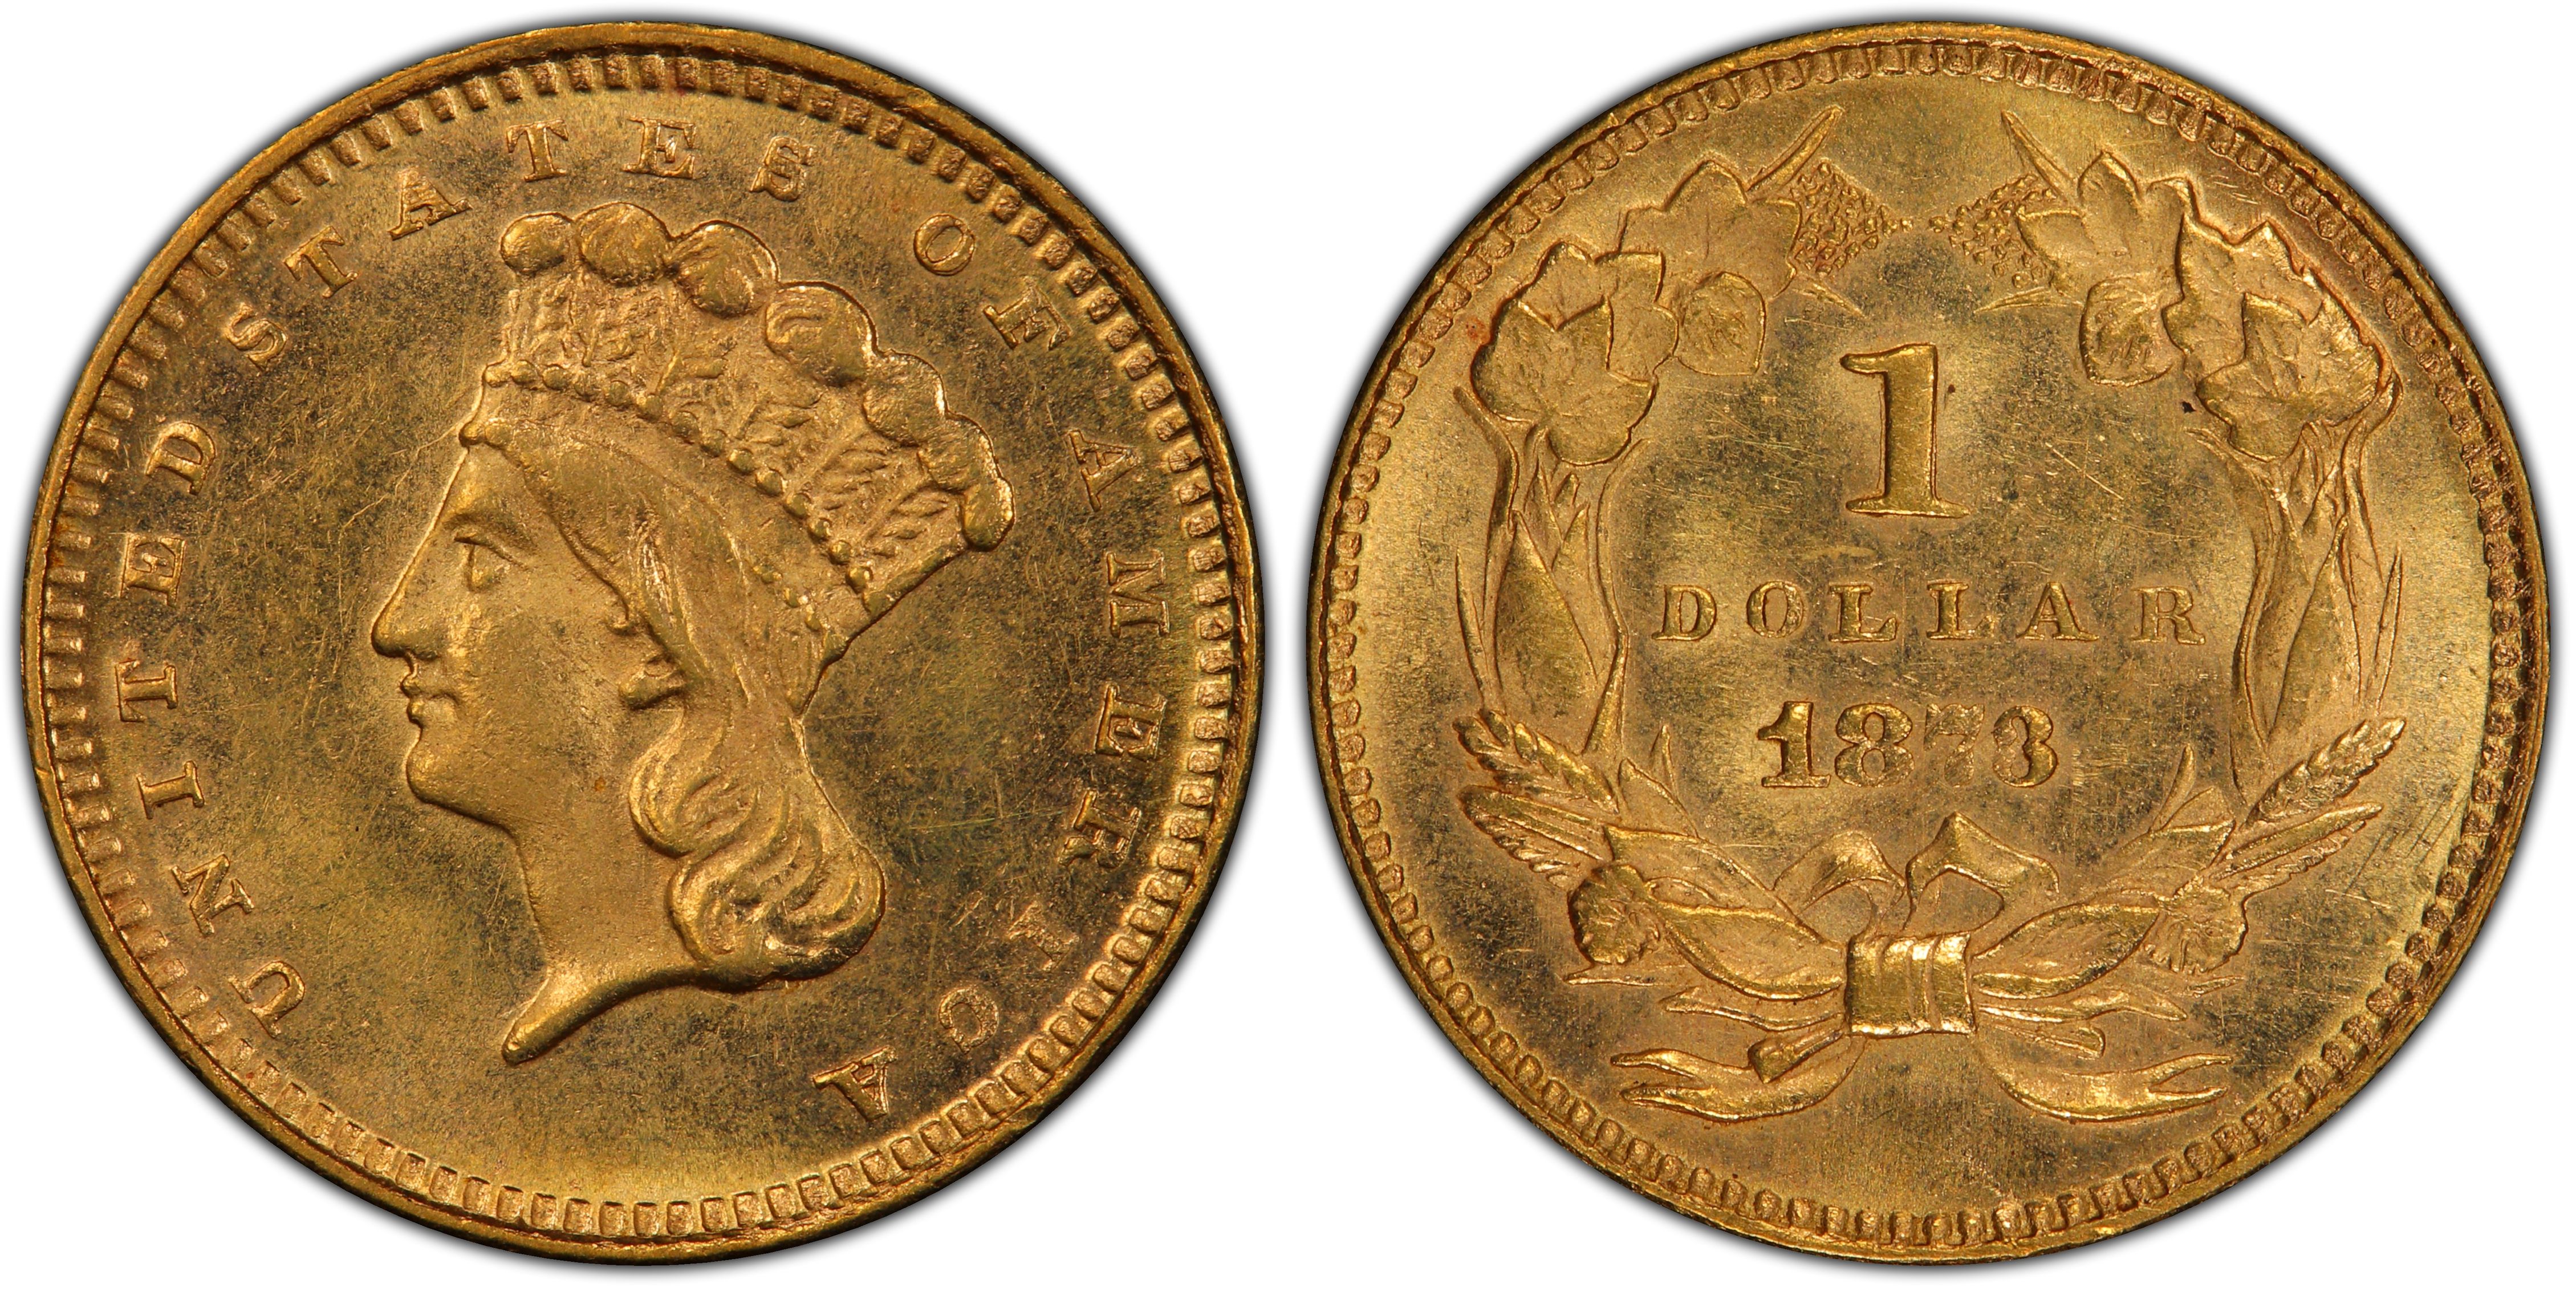 1873 G$1 Closed 3 (Regular Strike) Gold Dollar - PCGS CoinFacts